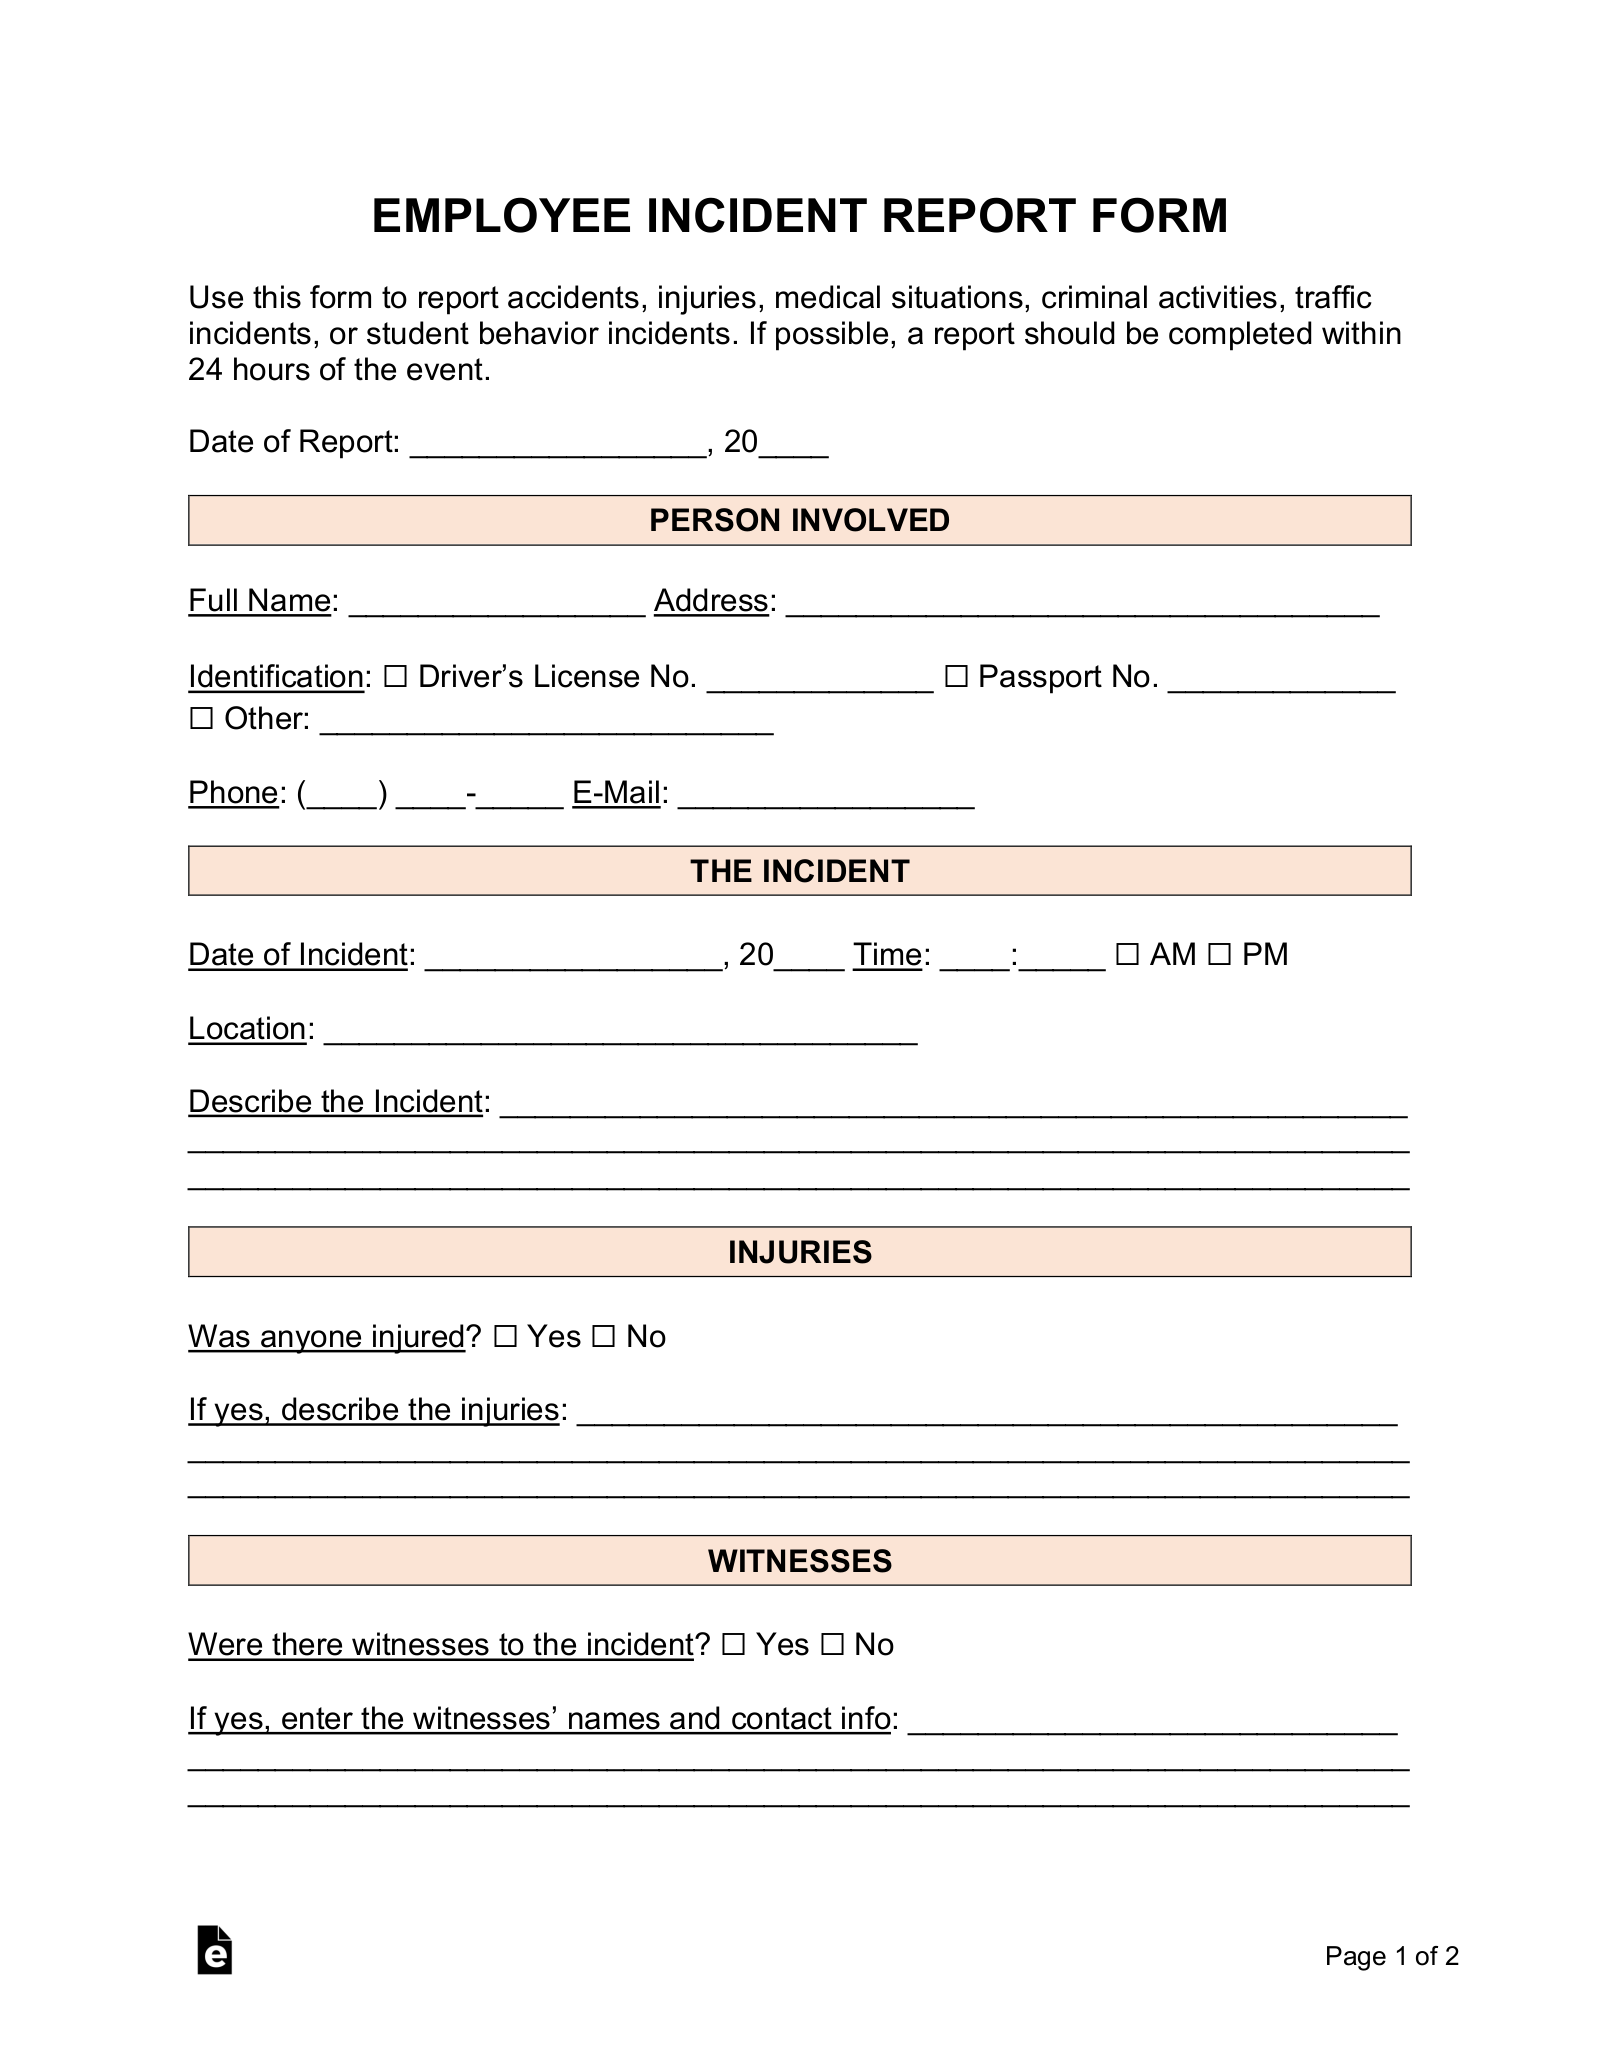 free-employee-incident-report-template-pdf-word-eforms